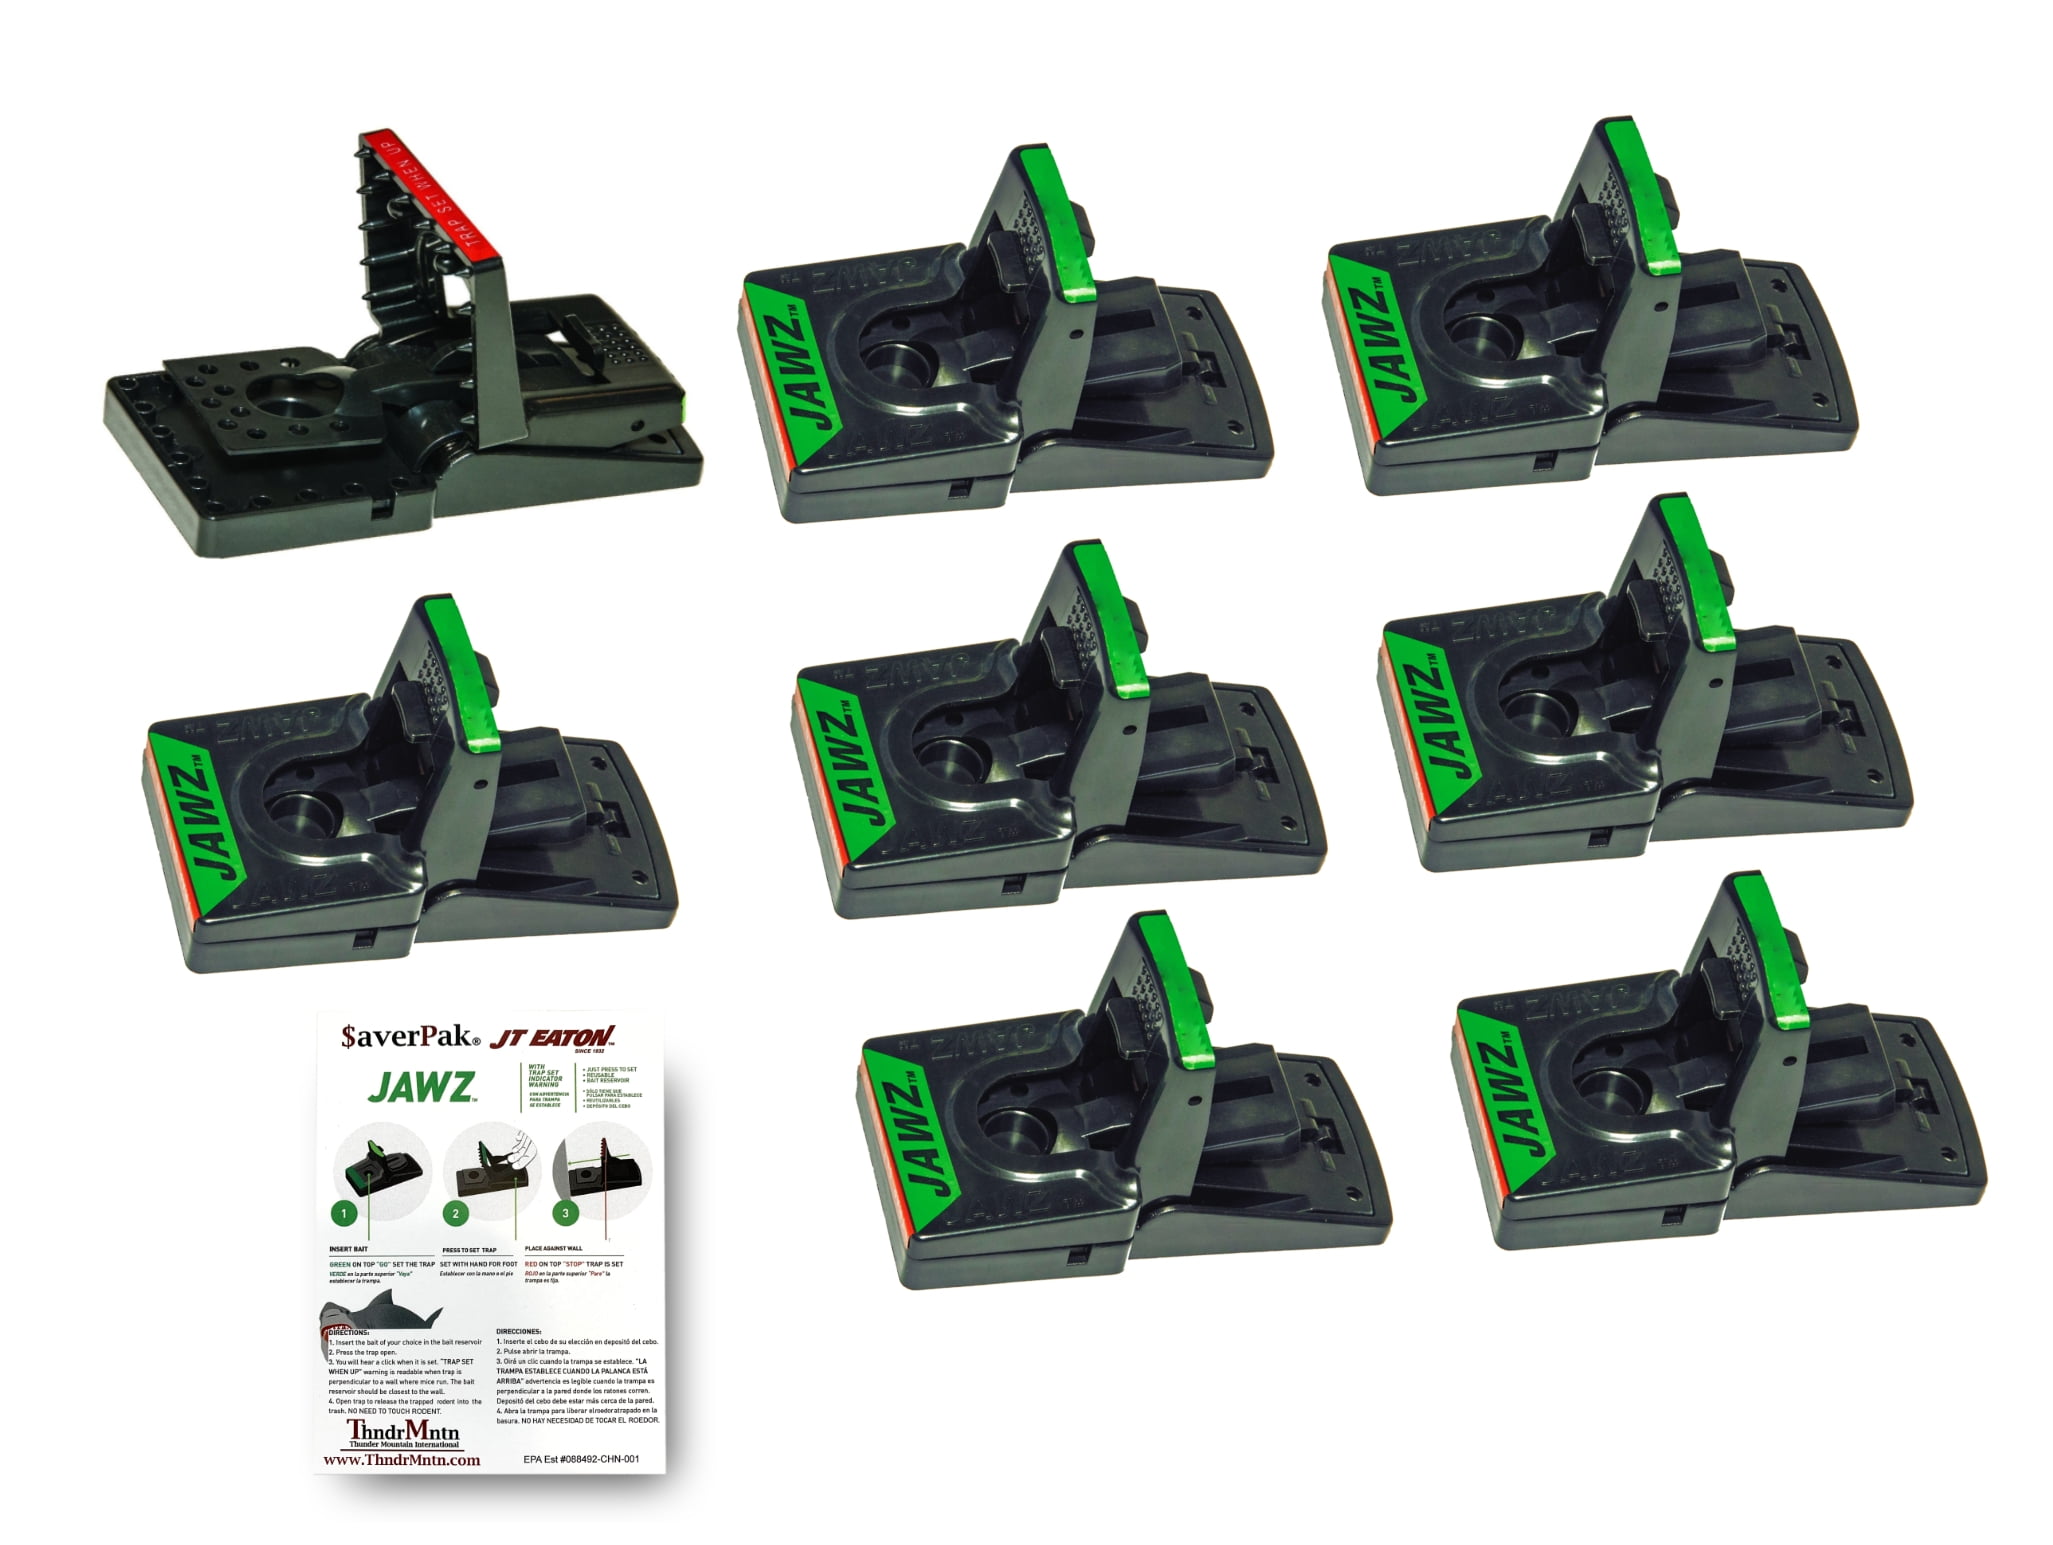 averPak 8 Pack - Includes 8 JT Eaton Jawz Mouse Traps for use with